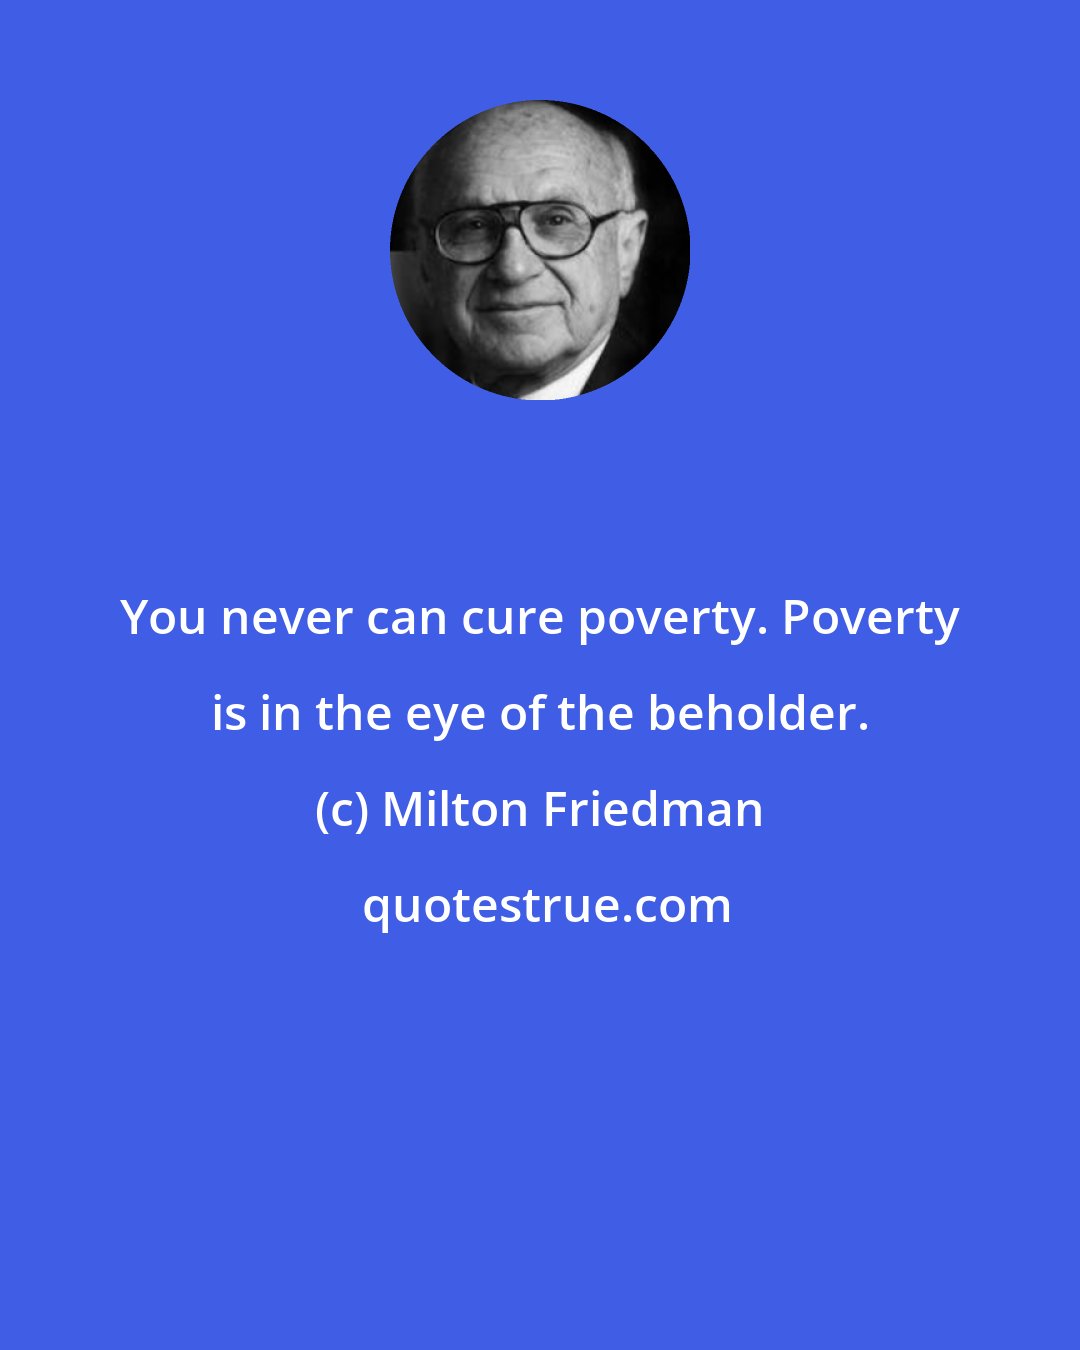 Milton Friedman: You never can cure poverty. Poverty is in the eye of the beholder.